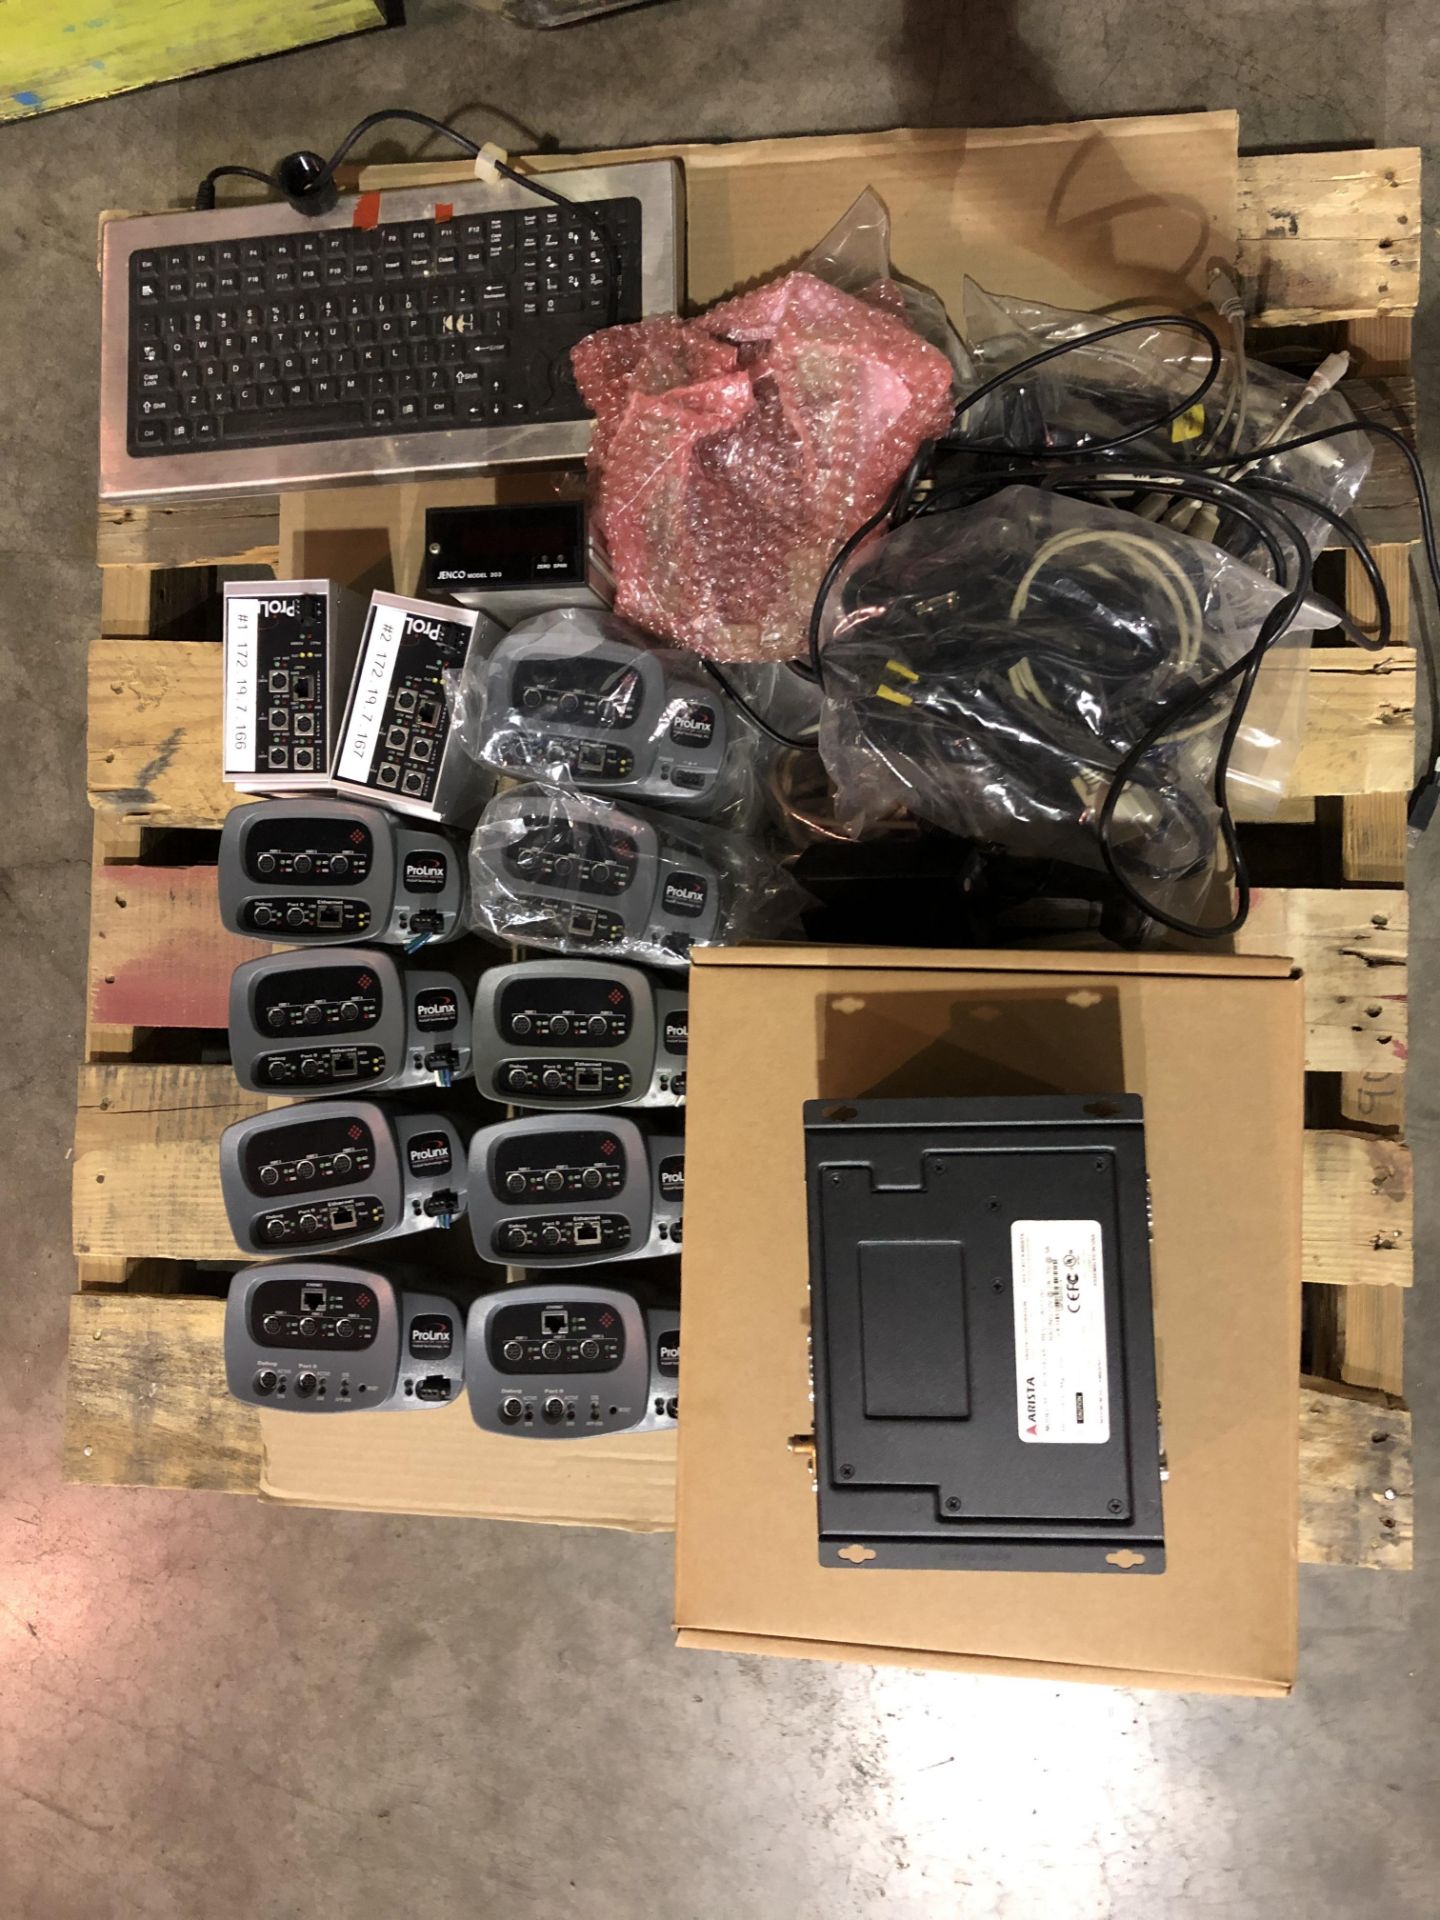 LOT OF MISC CONTROLS INCLUDING ARISTA MICROBOX AND PROLINE RIGGING/LOADING FEE - $50